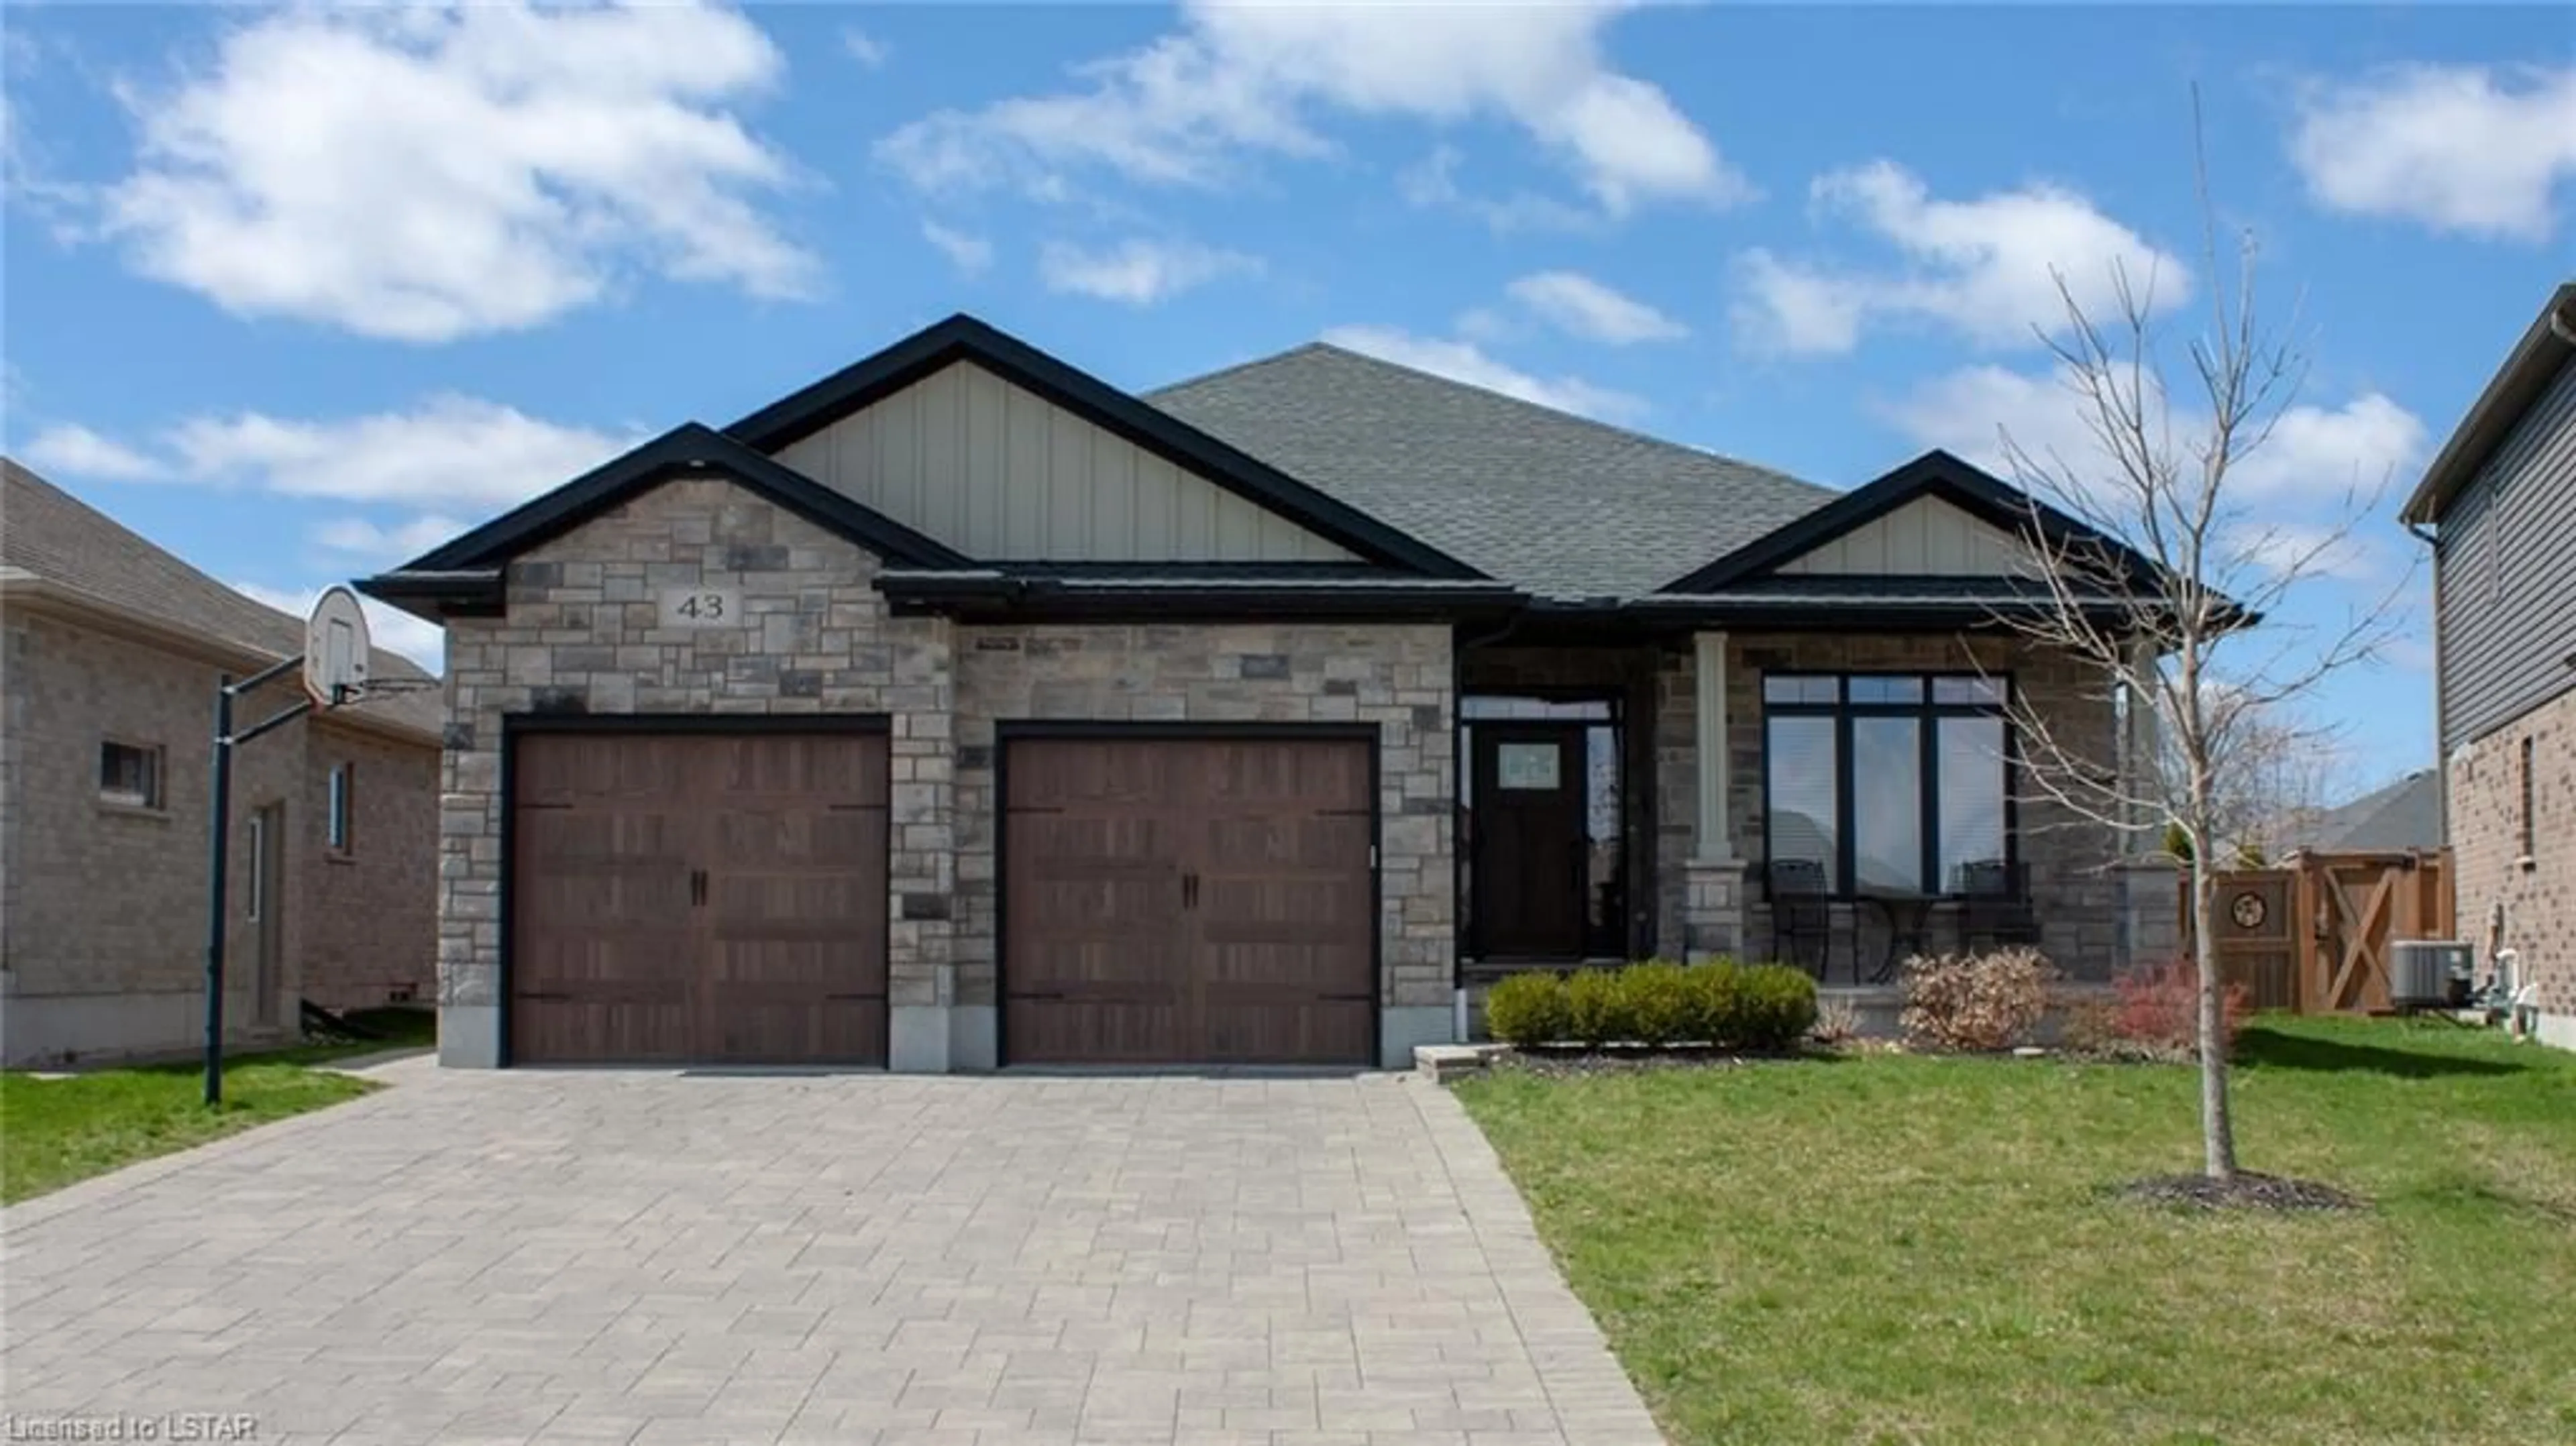 Home with brick exterior material for 43 Brenmar Cres, Belmont Ontario N0L 1B0